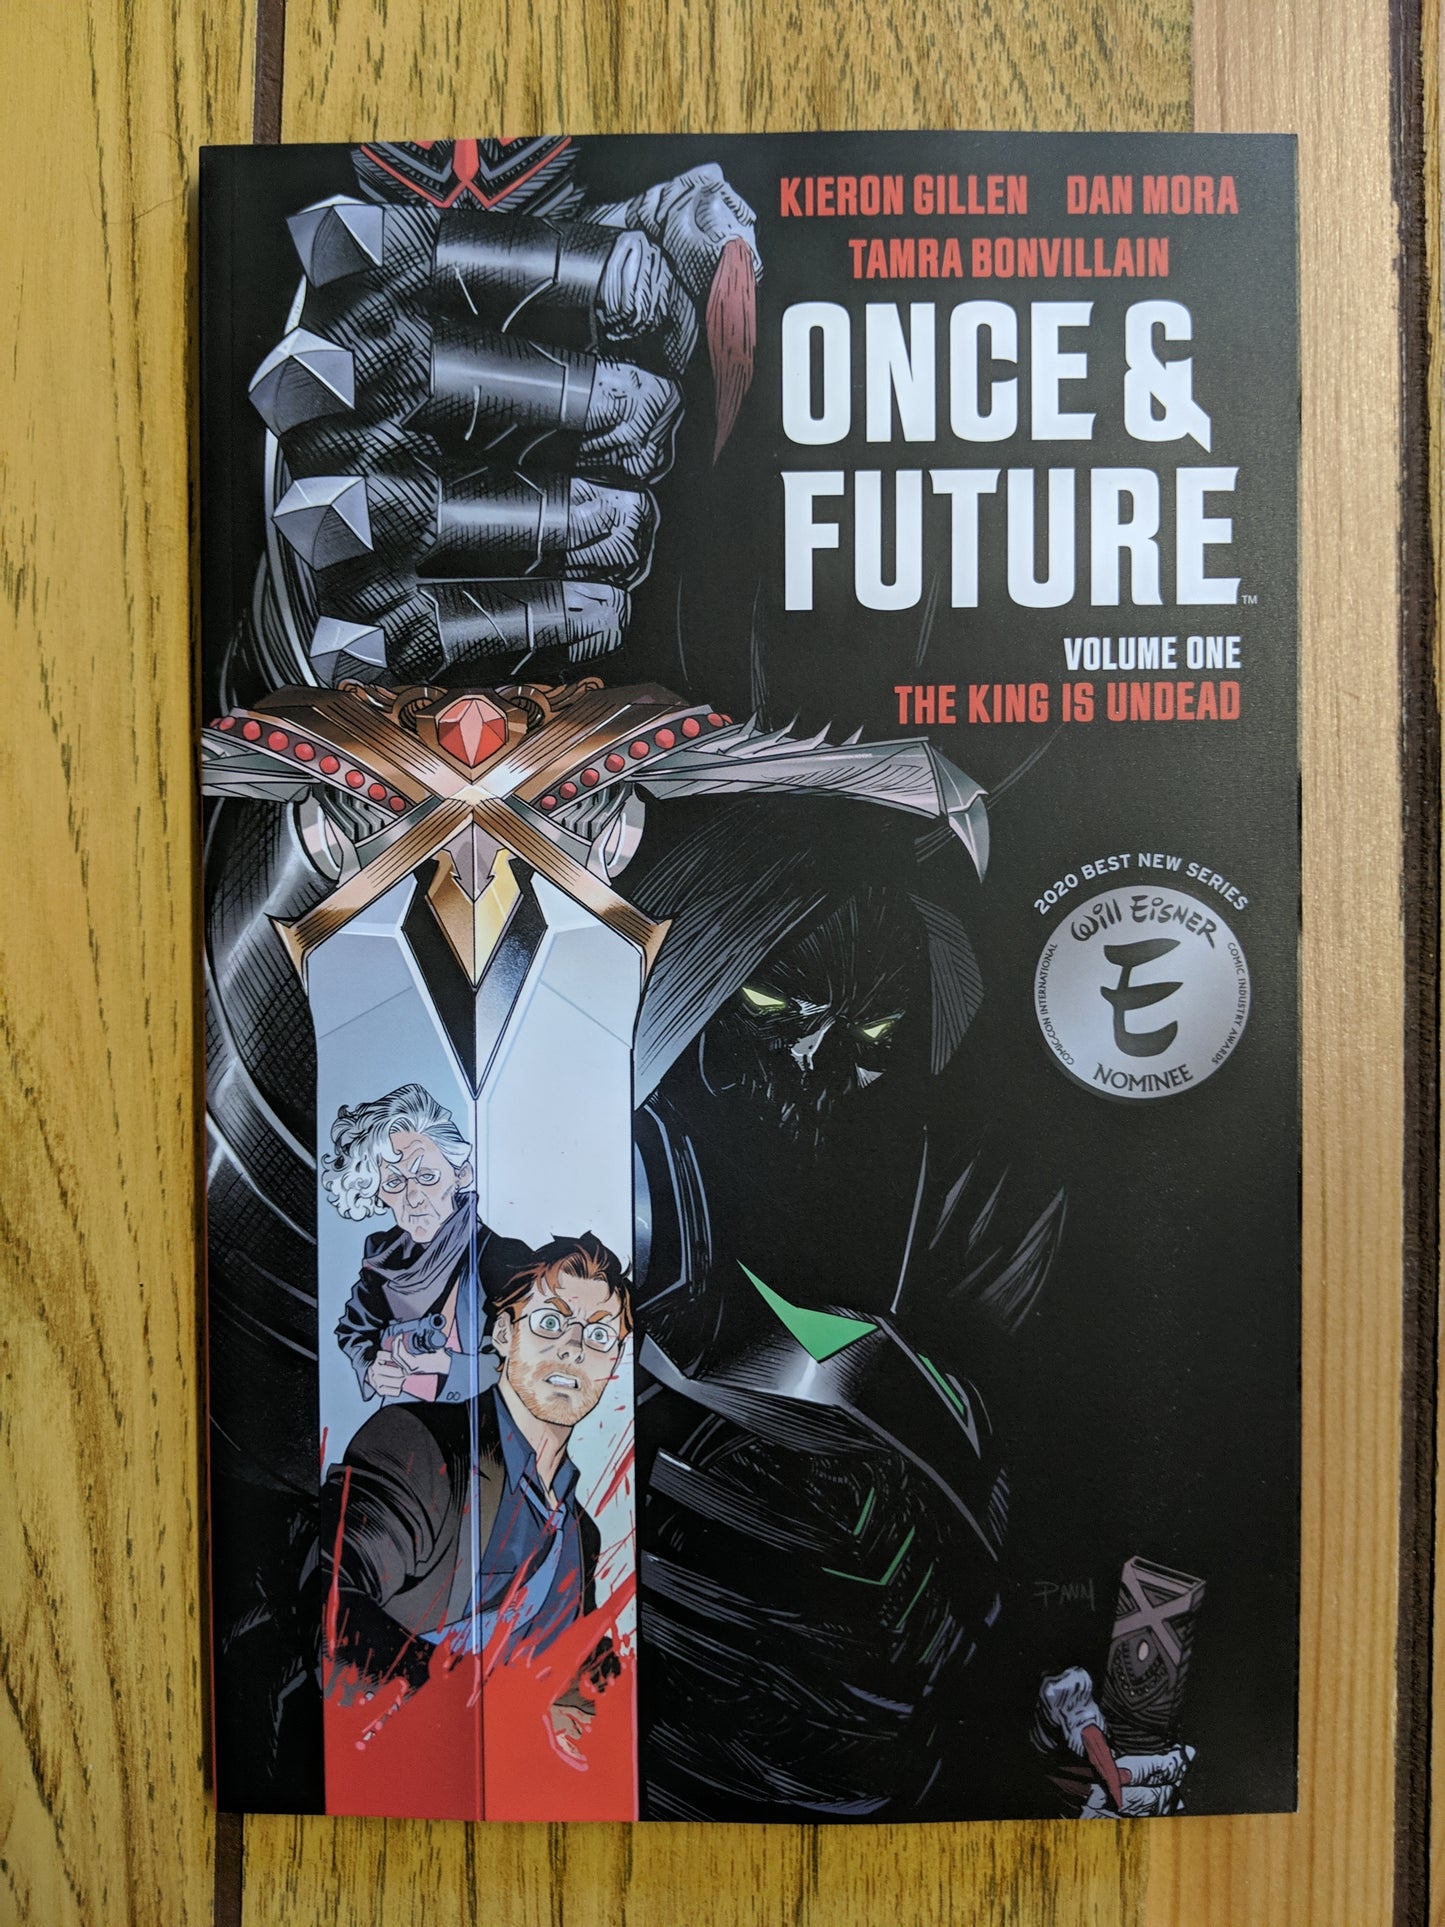 Once & Future Vol 1